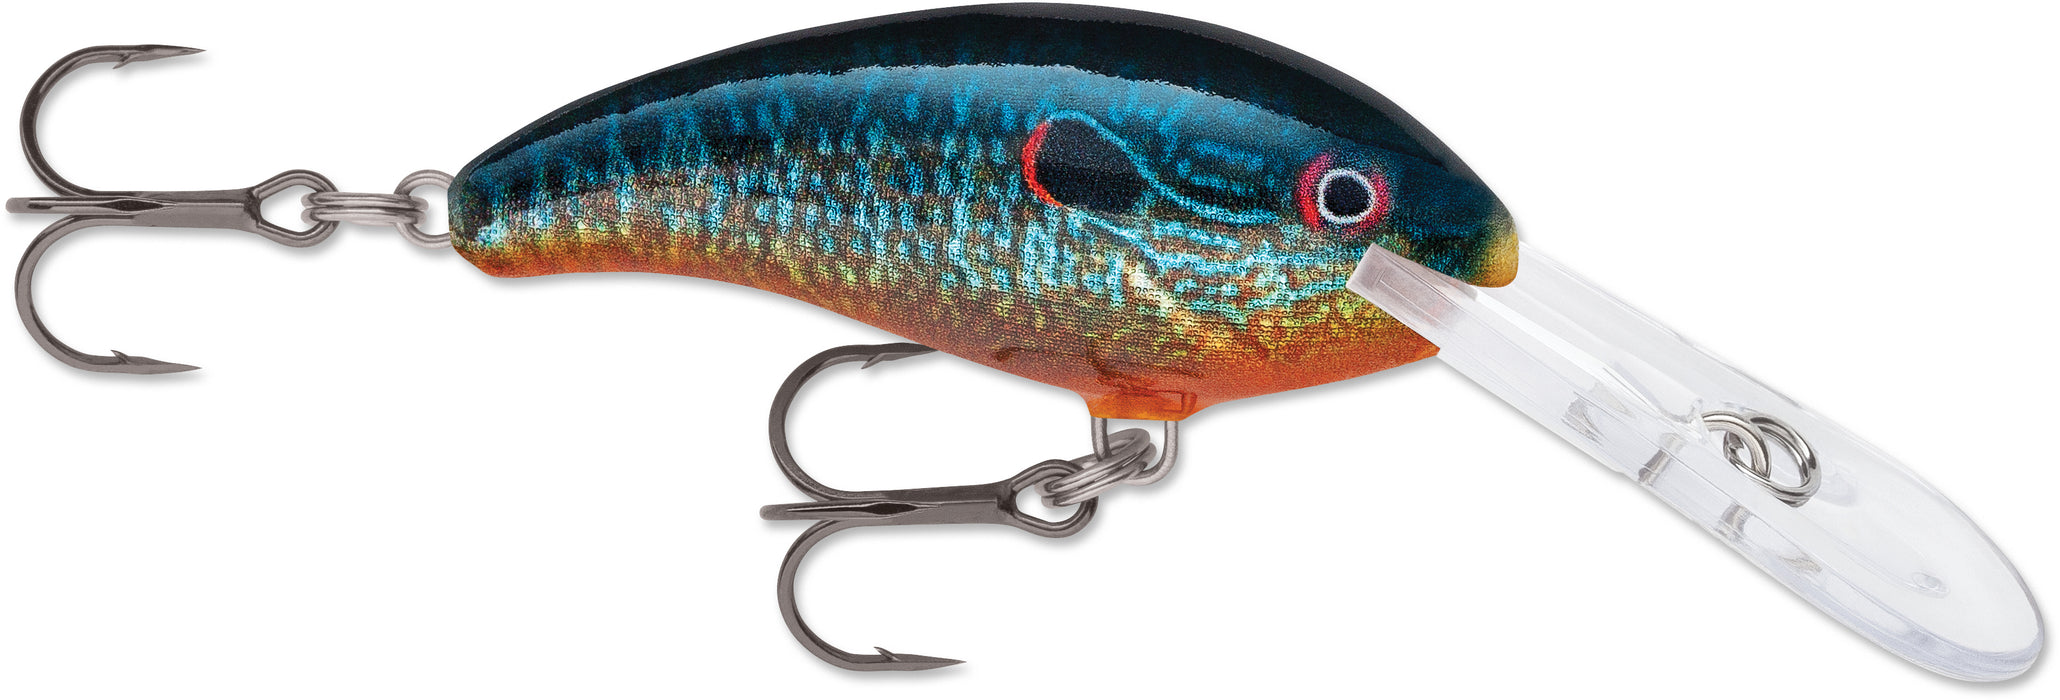 Westcoast Pacific Series Spoon Lure Size 3 Midnight Rider -  PS3-MIDNIGHTRIDER